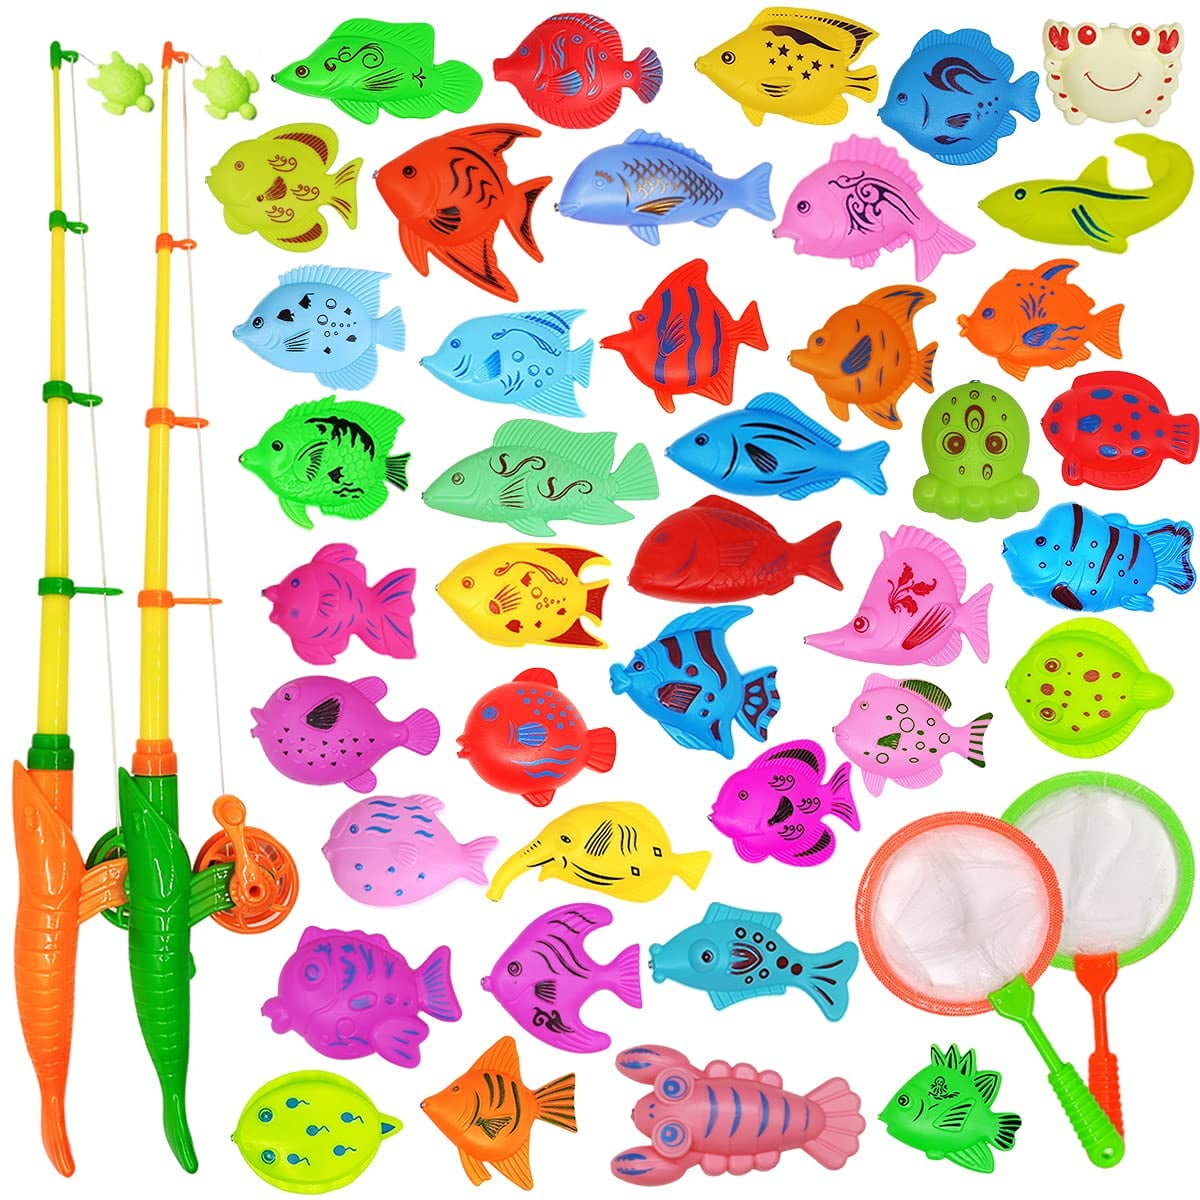  Kiditos Magnetic Fishing Toys Game Set with 4 Bathtub Tub Toys,  Swimming Pool Toy, Colorful Ocean Sea Animals, Fishing Pole Rod Net, Fishing  Game for Toddler Kids Age 3 4 5